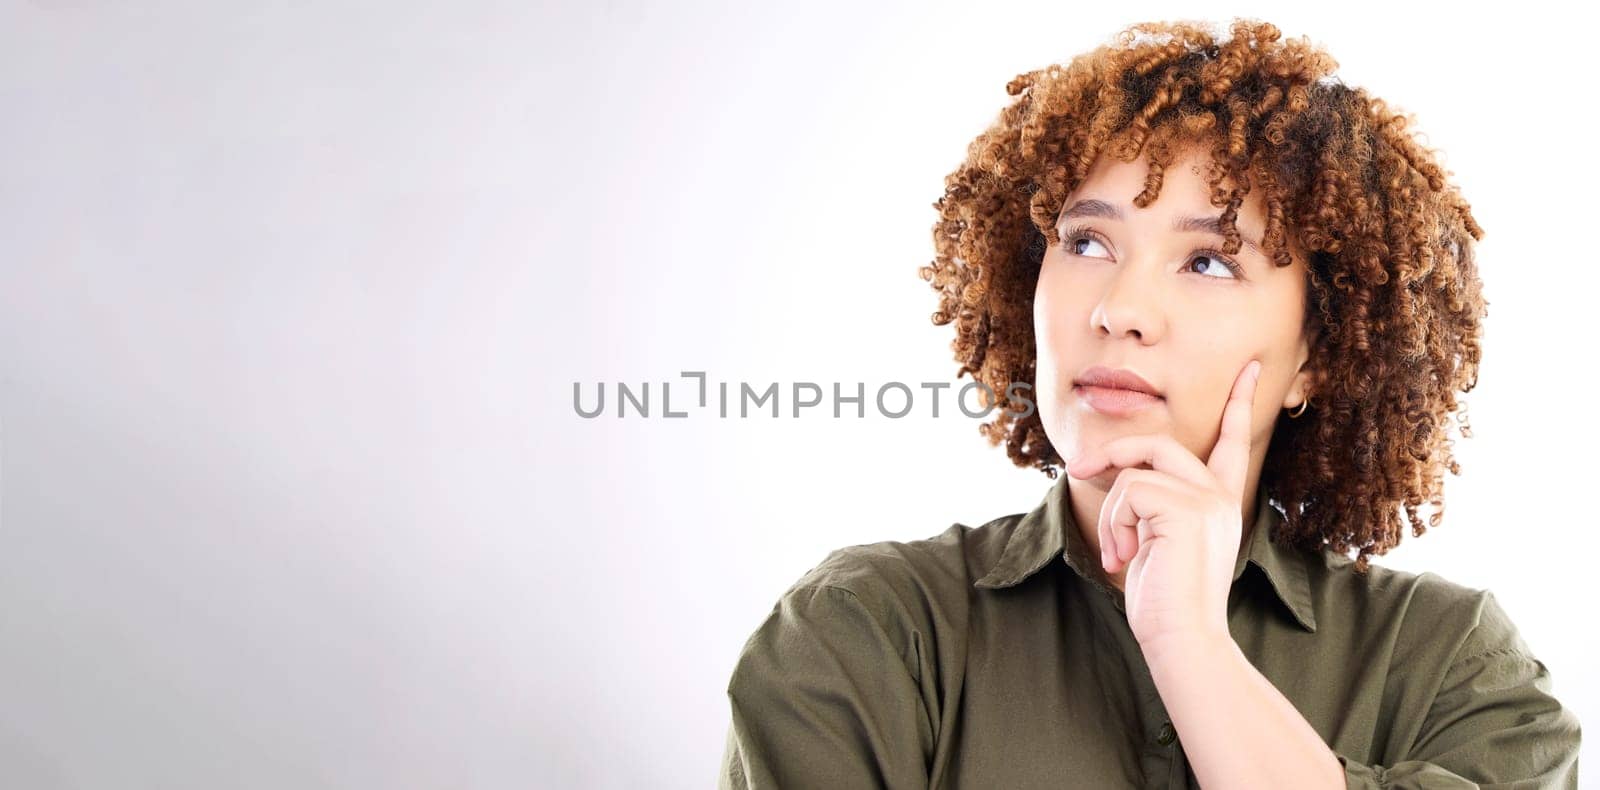 Face, thinking and mockup with a black woman in studio on a gray background for product placement. Idea, space and mock up with an attractive young female posing on a wall of empty branding space.